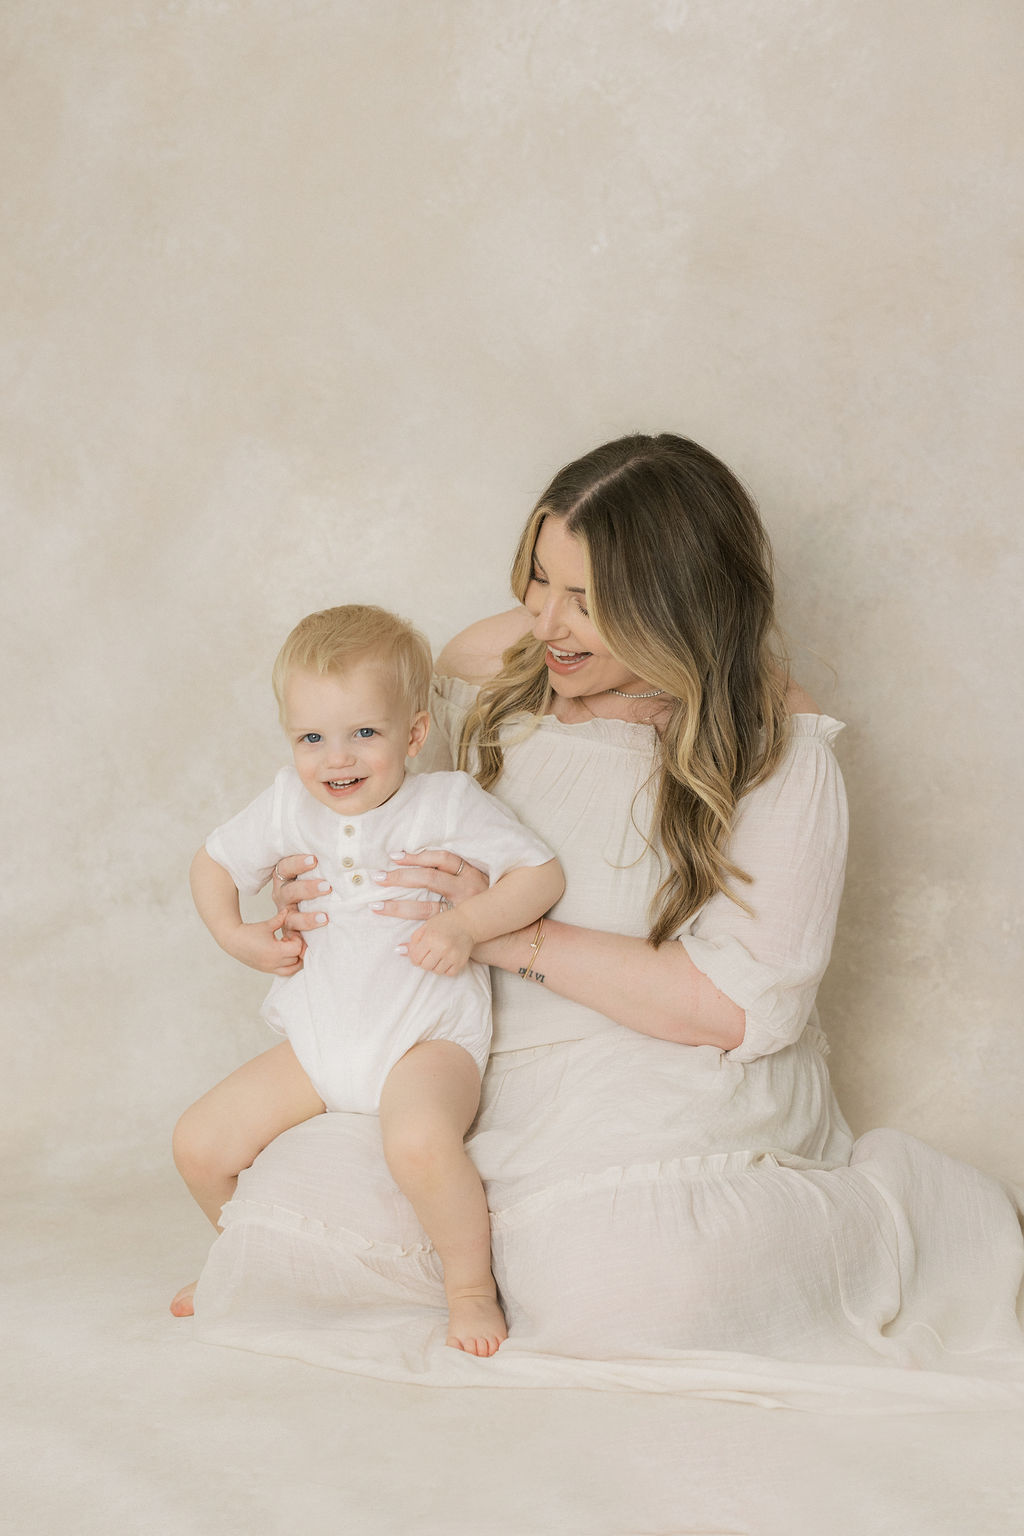 A happy pregnant mom plays with her toddler son in a studio in her lap after some prenatal yoga nj